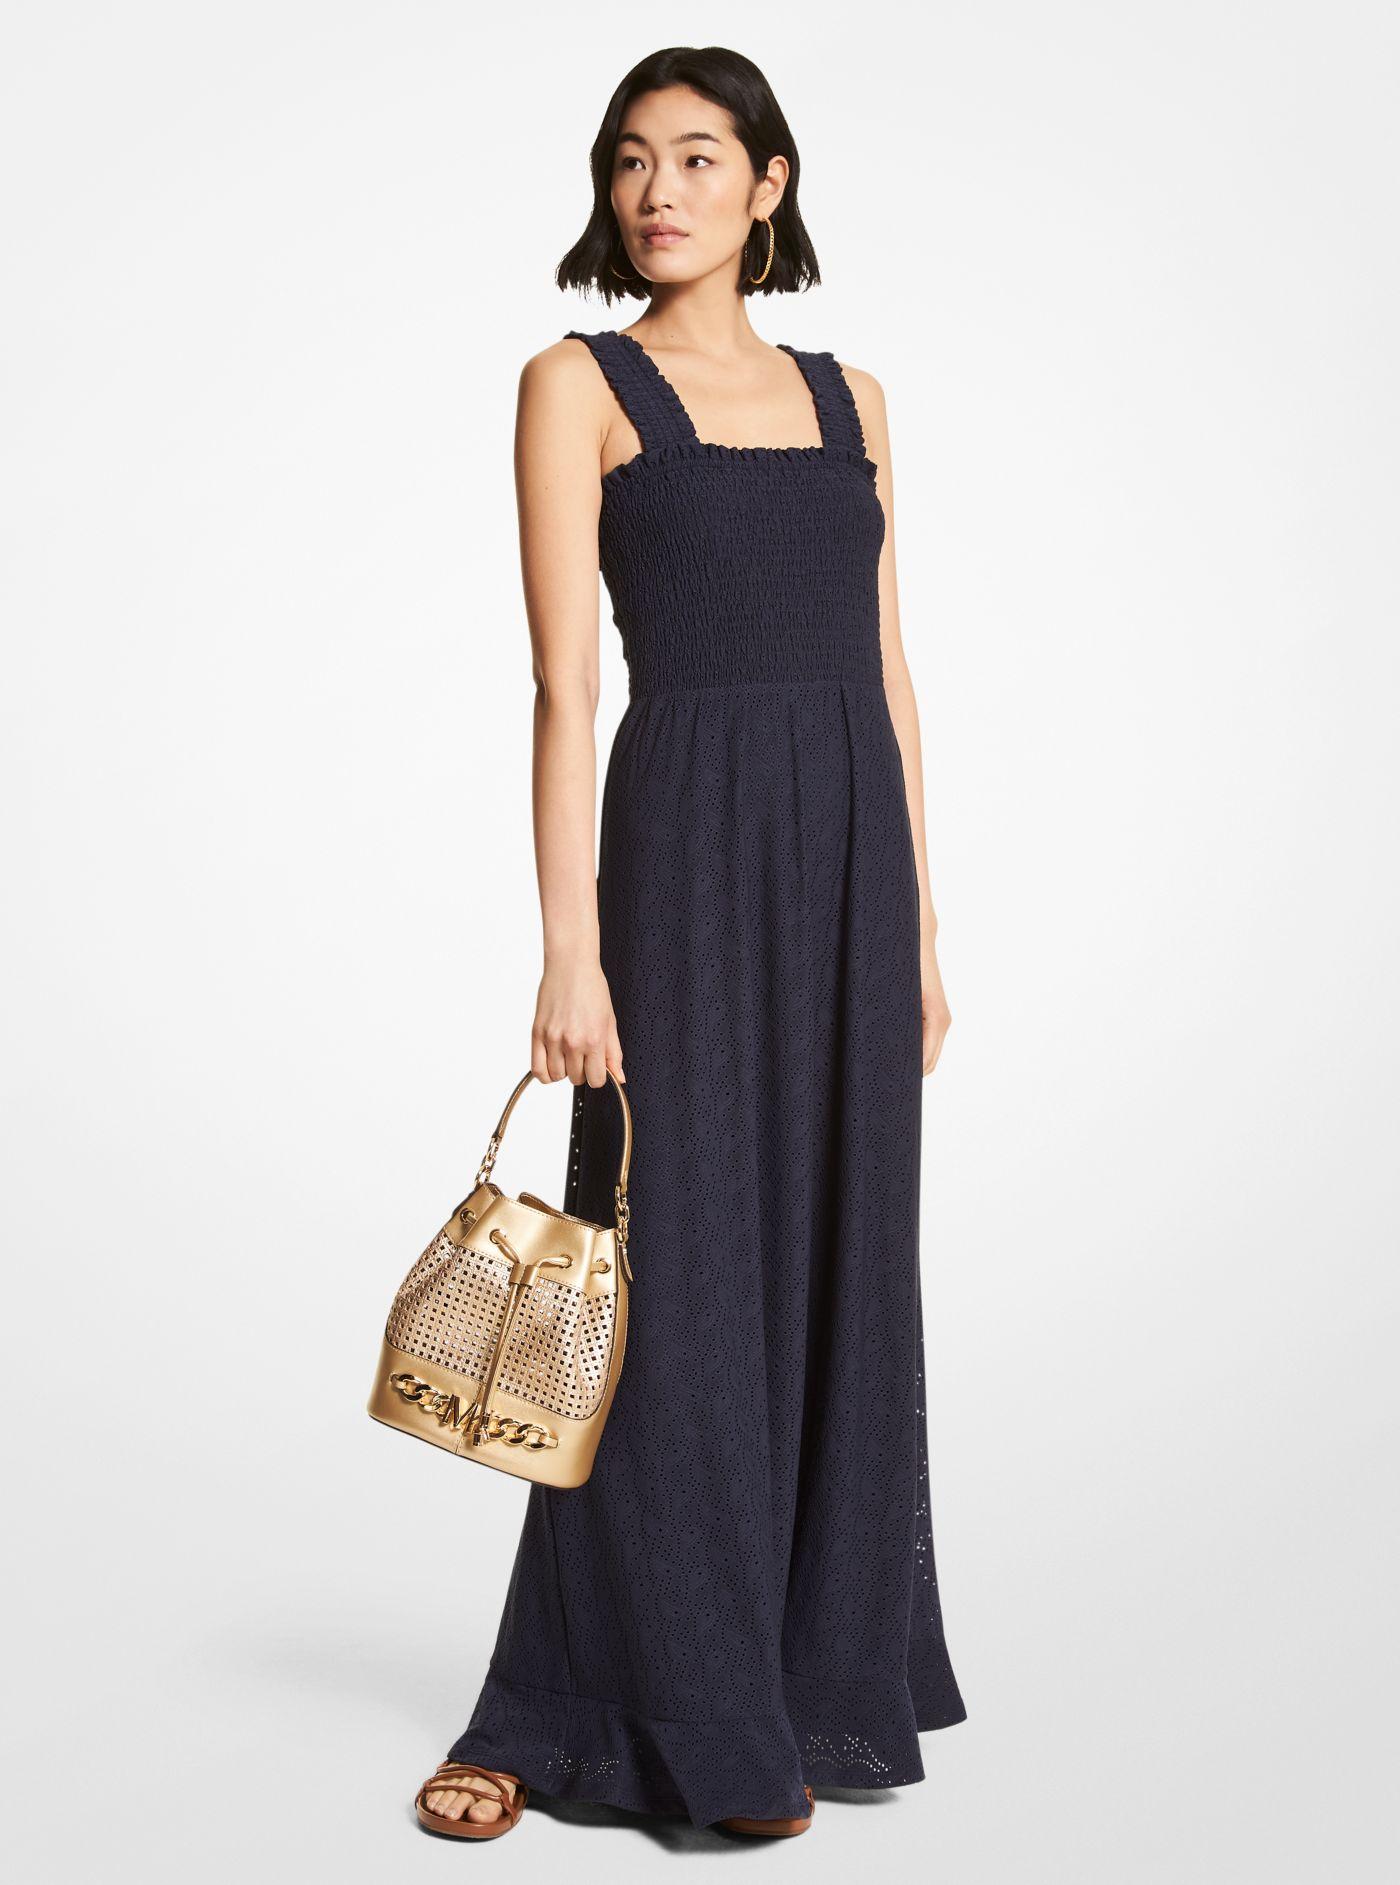 Michael Kors Synthetic Paisley Eyelet Smocked Woven Dress in Blue ...